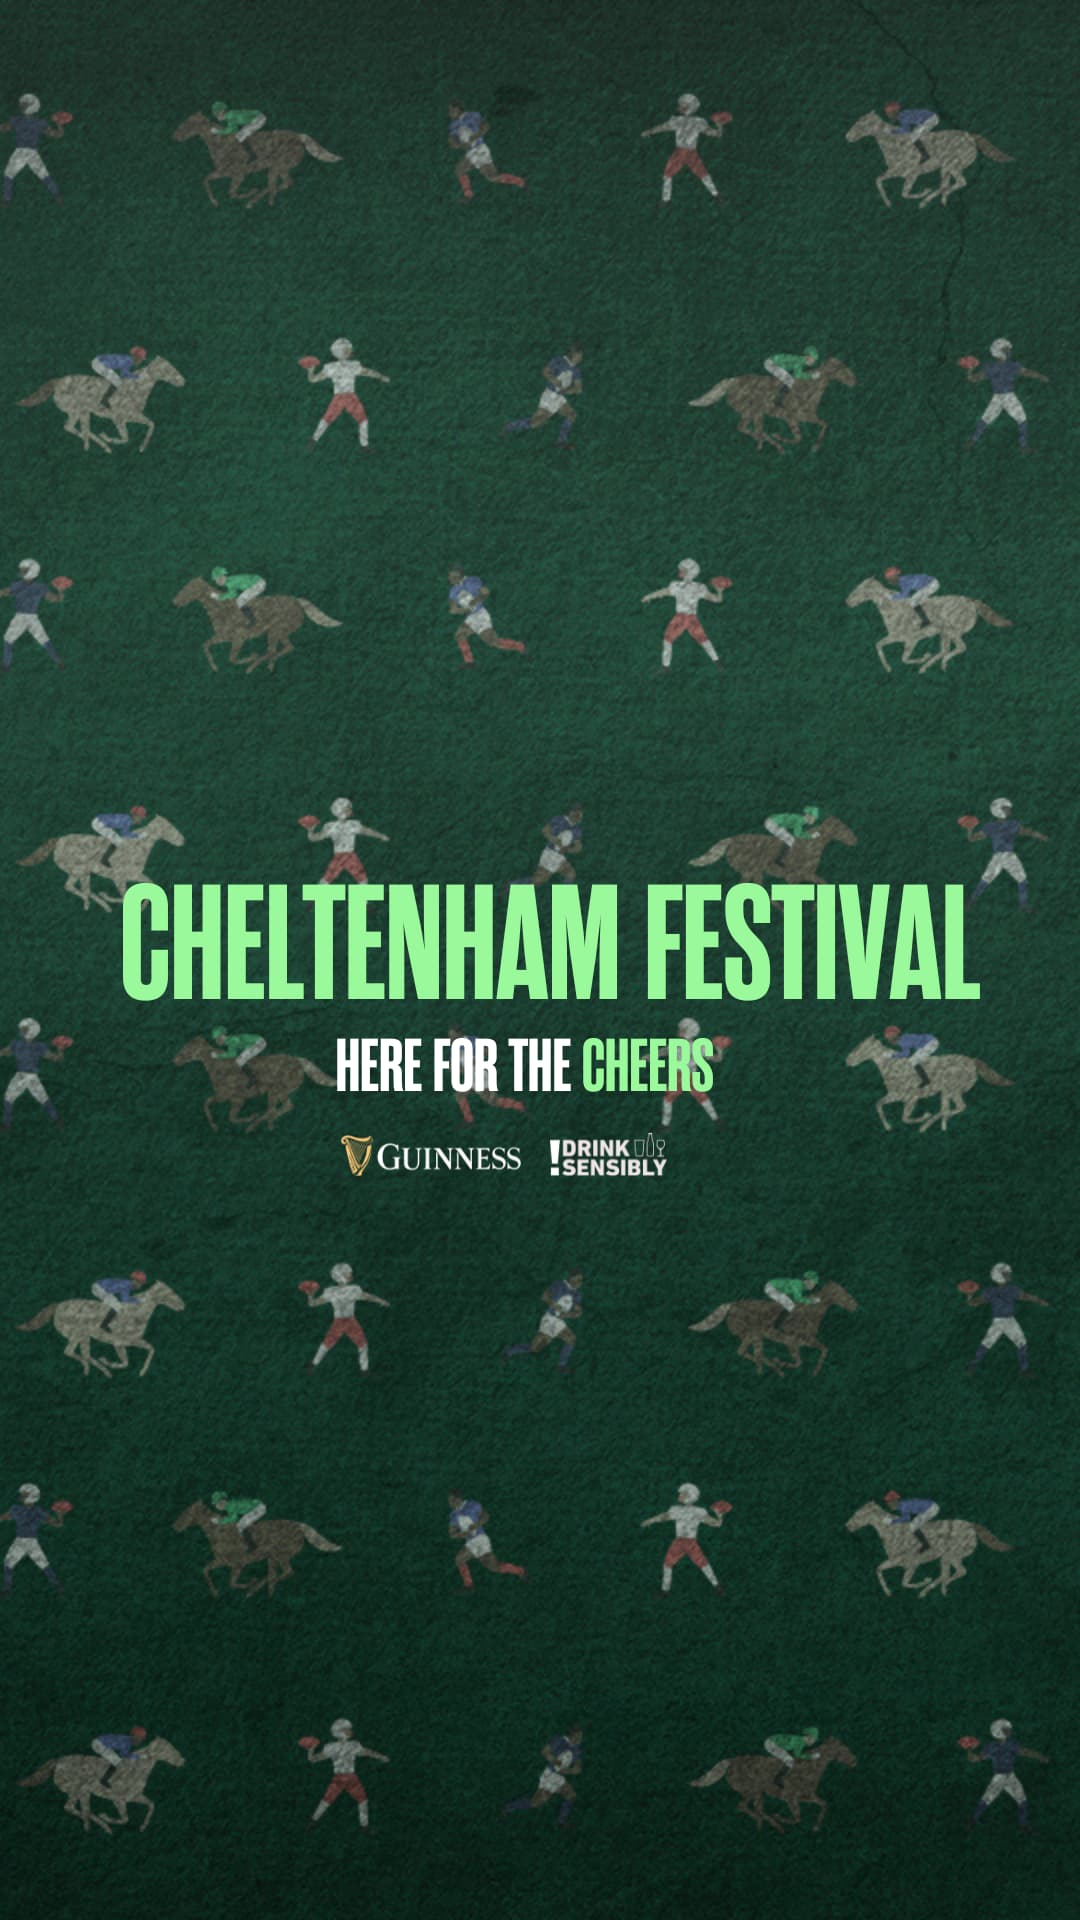 PUBS TO VISIT DURING THE CHELTENHAM FESTIVAL